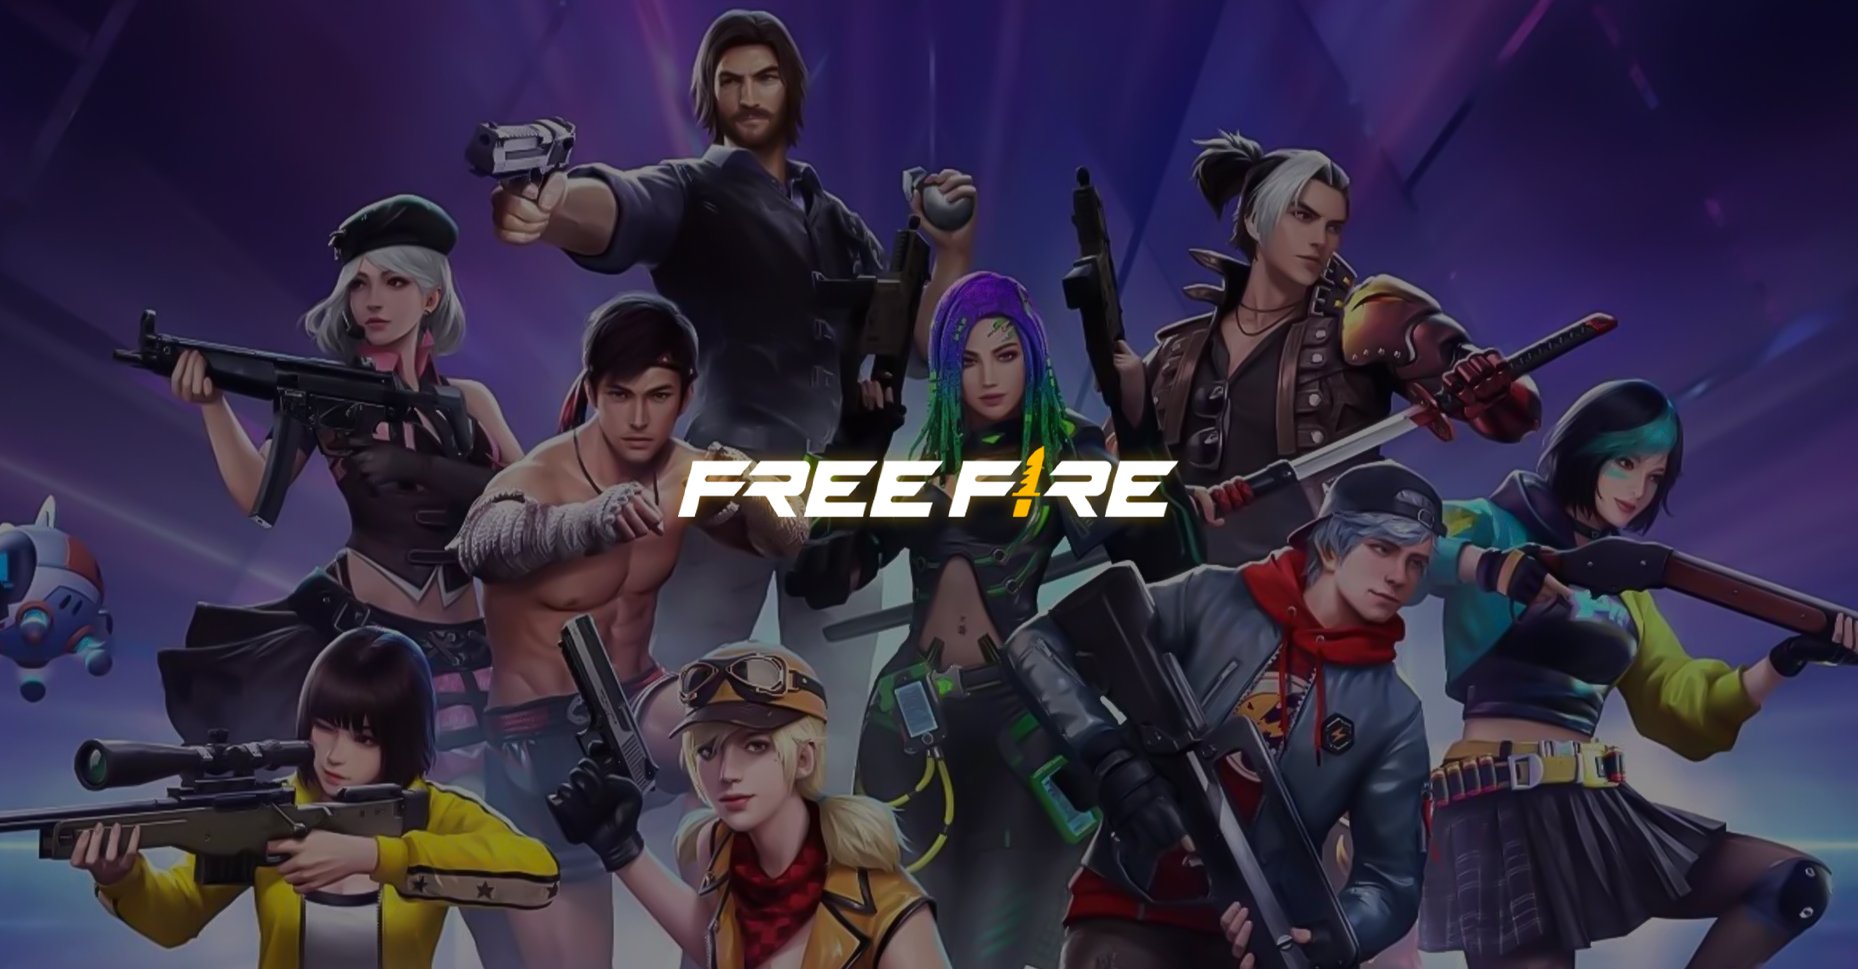 free fire  Hype Games